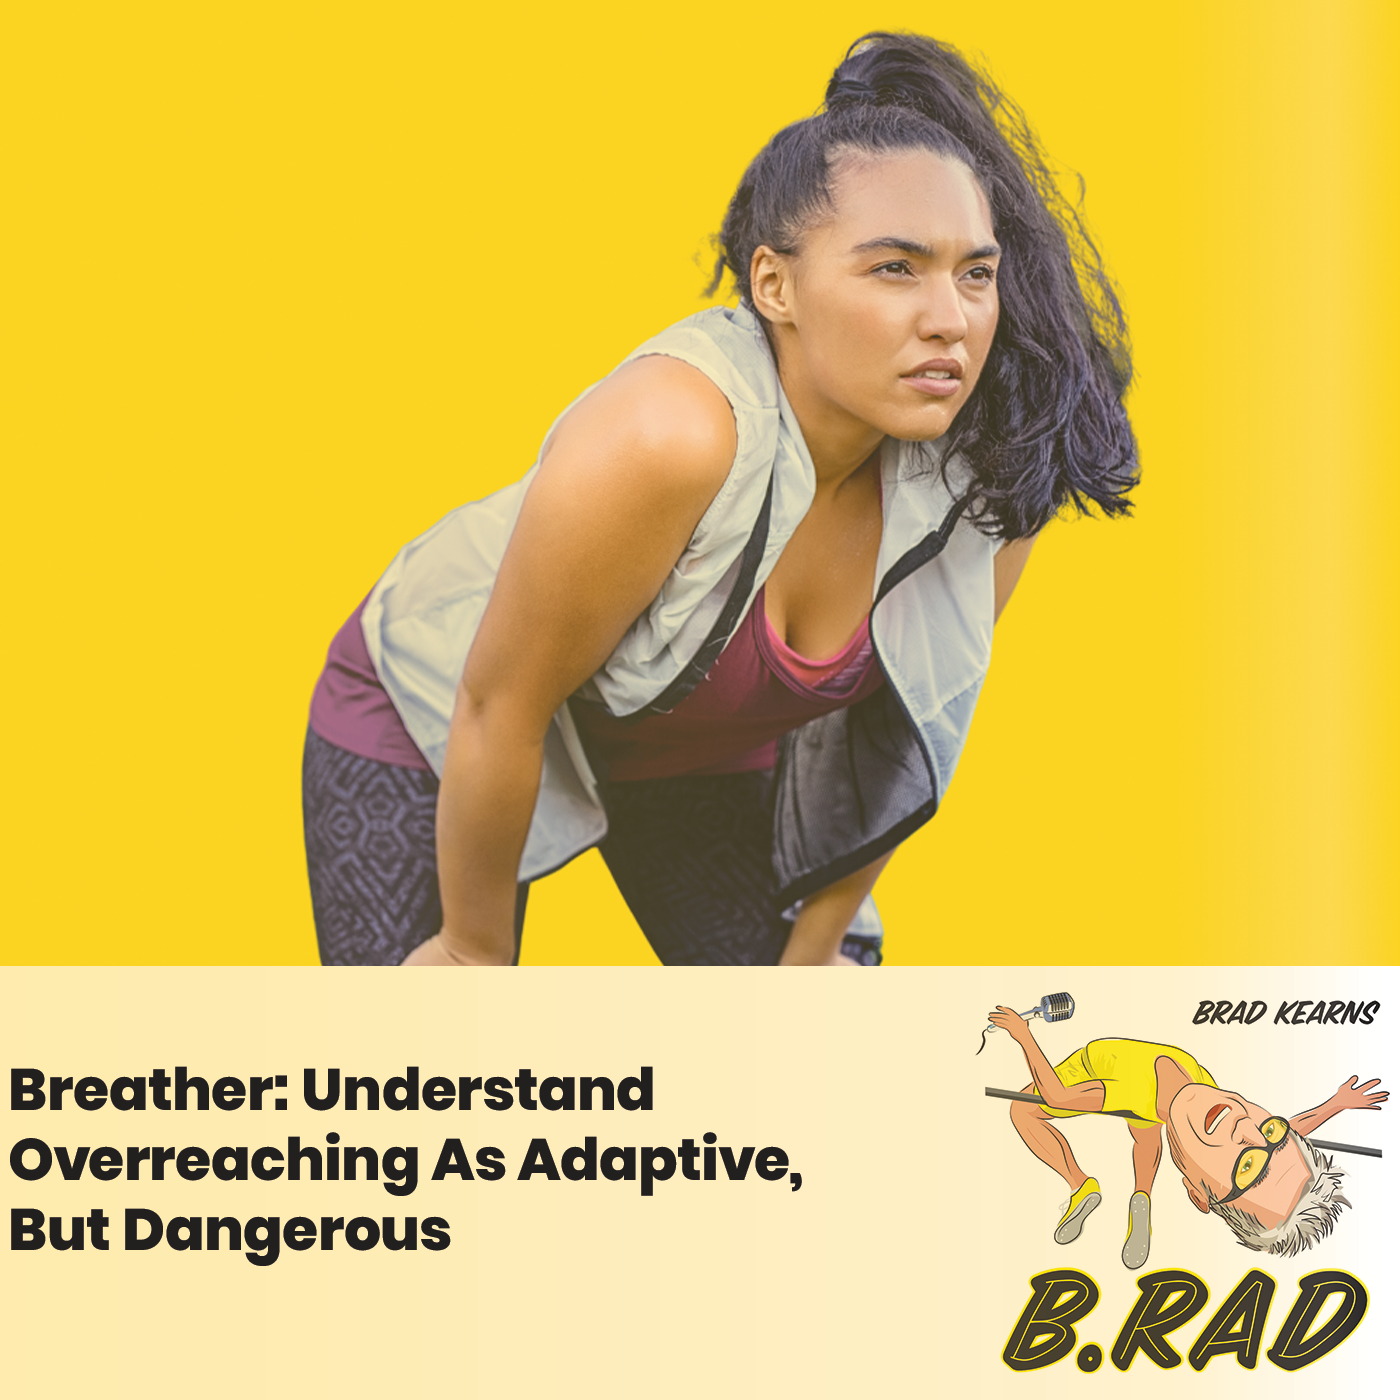 Breather: Understand Overreaching As Adaptive, But Dangerous